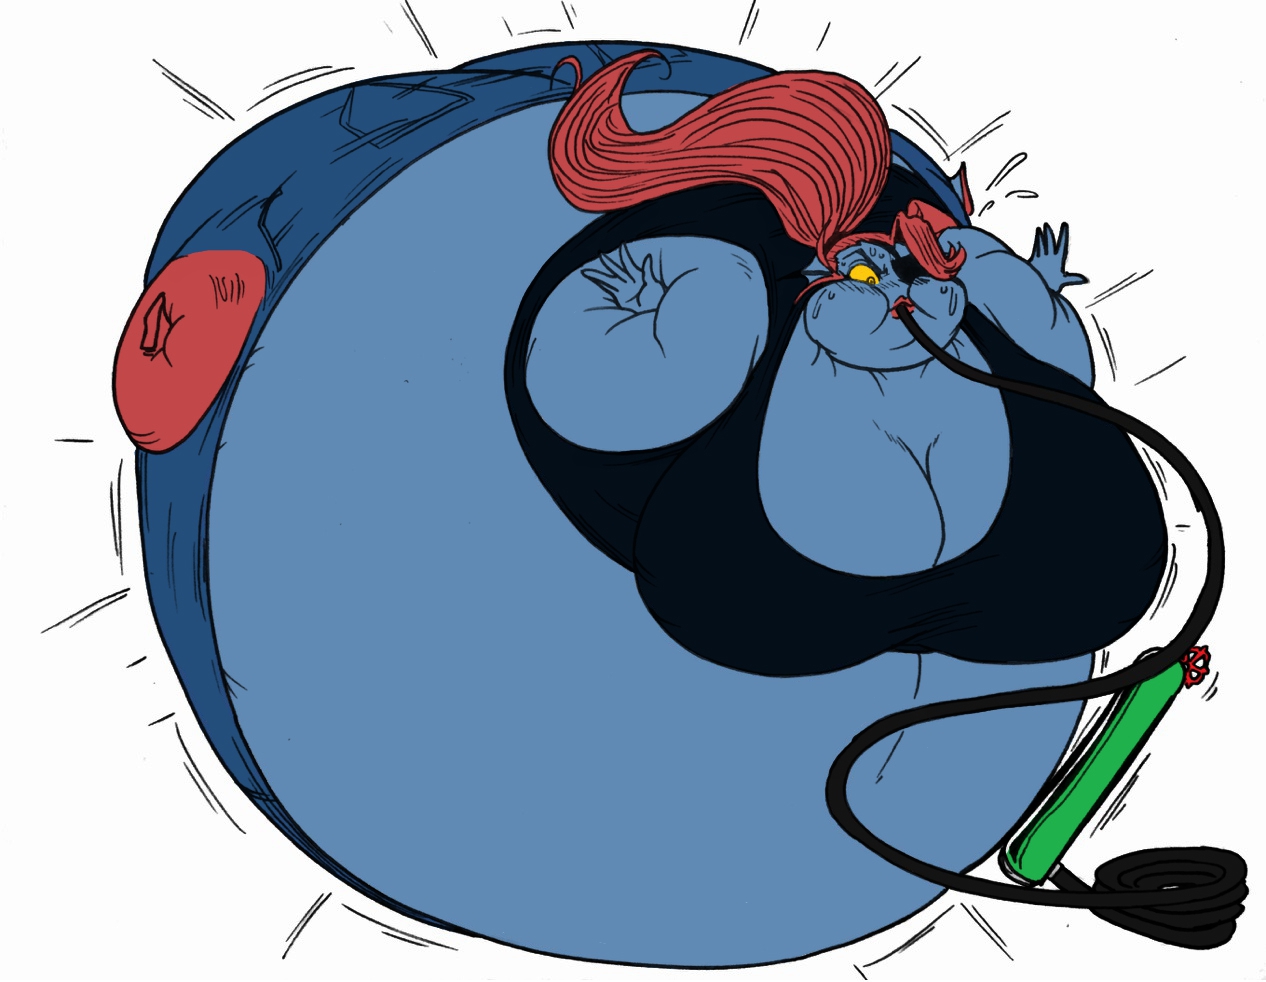 Undyne uber inflated part 2 by Yerkeijfercash colored. 